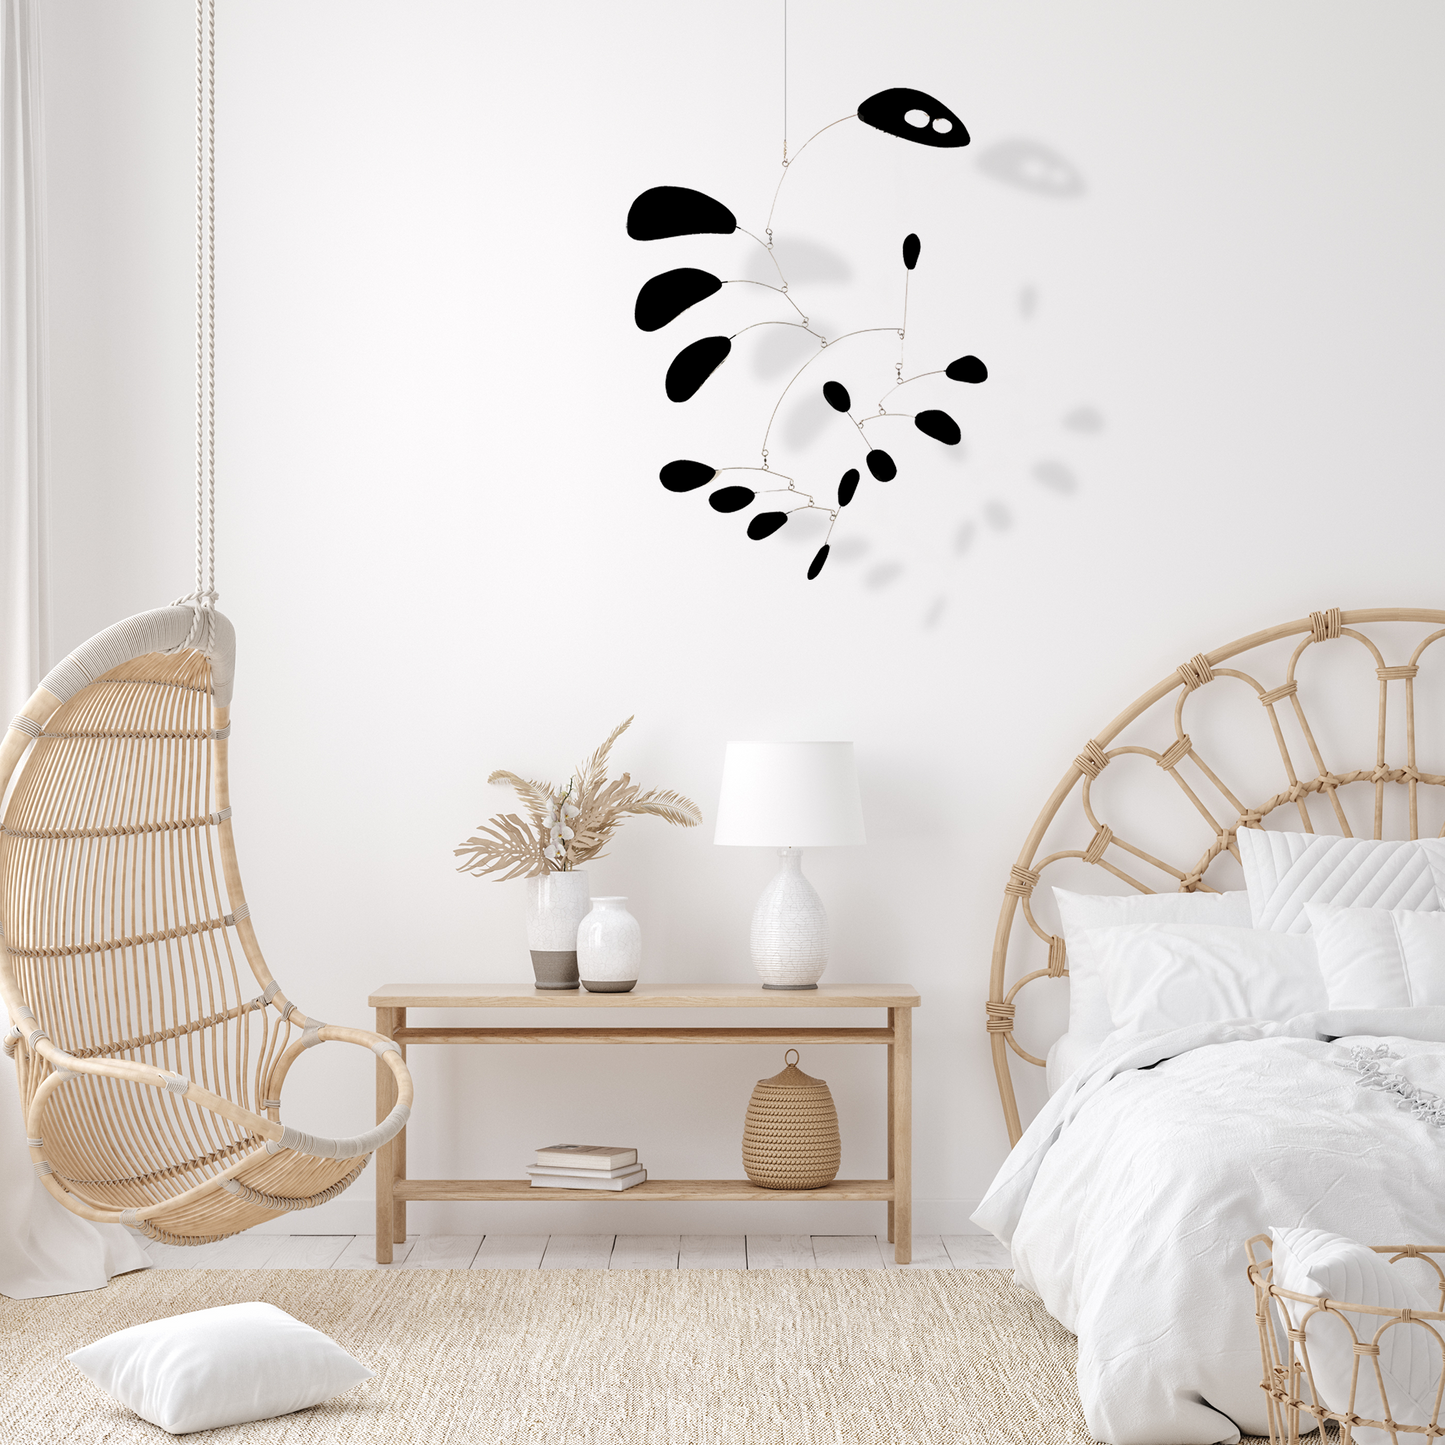 Black CoolCat kinetic mid century modern style hanging art mobile in boho bedroom with hanging chair, end table and wicker bed - bespoke art mobiles by AtomicMobiles.com